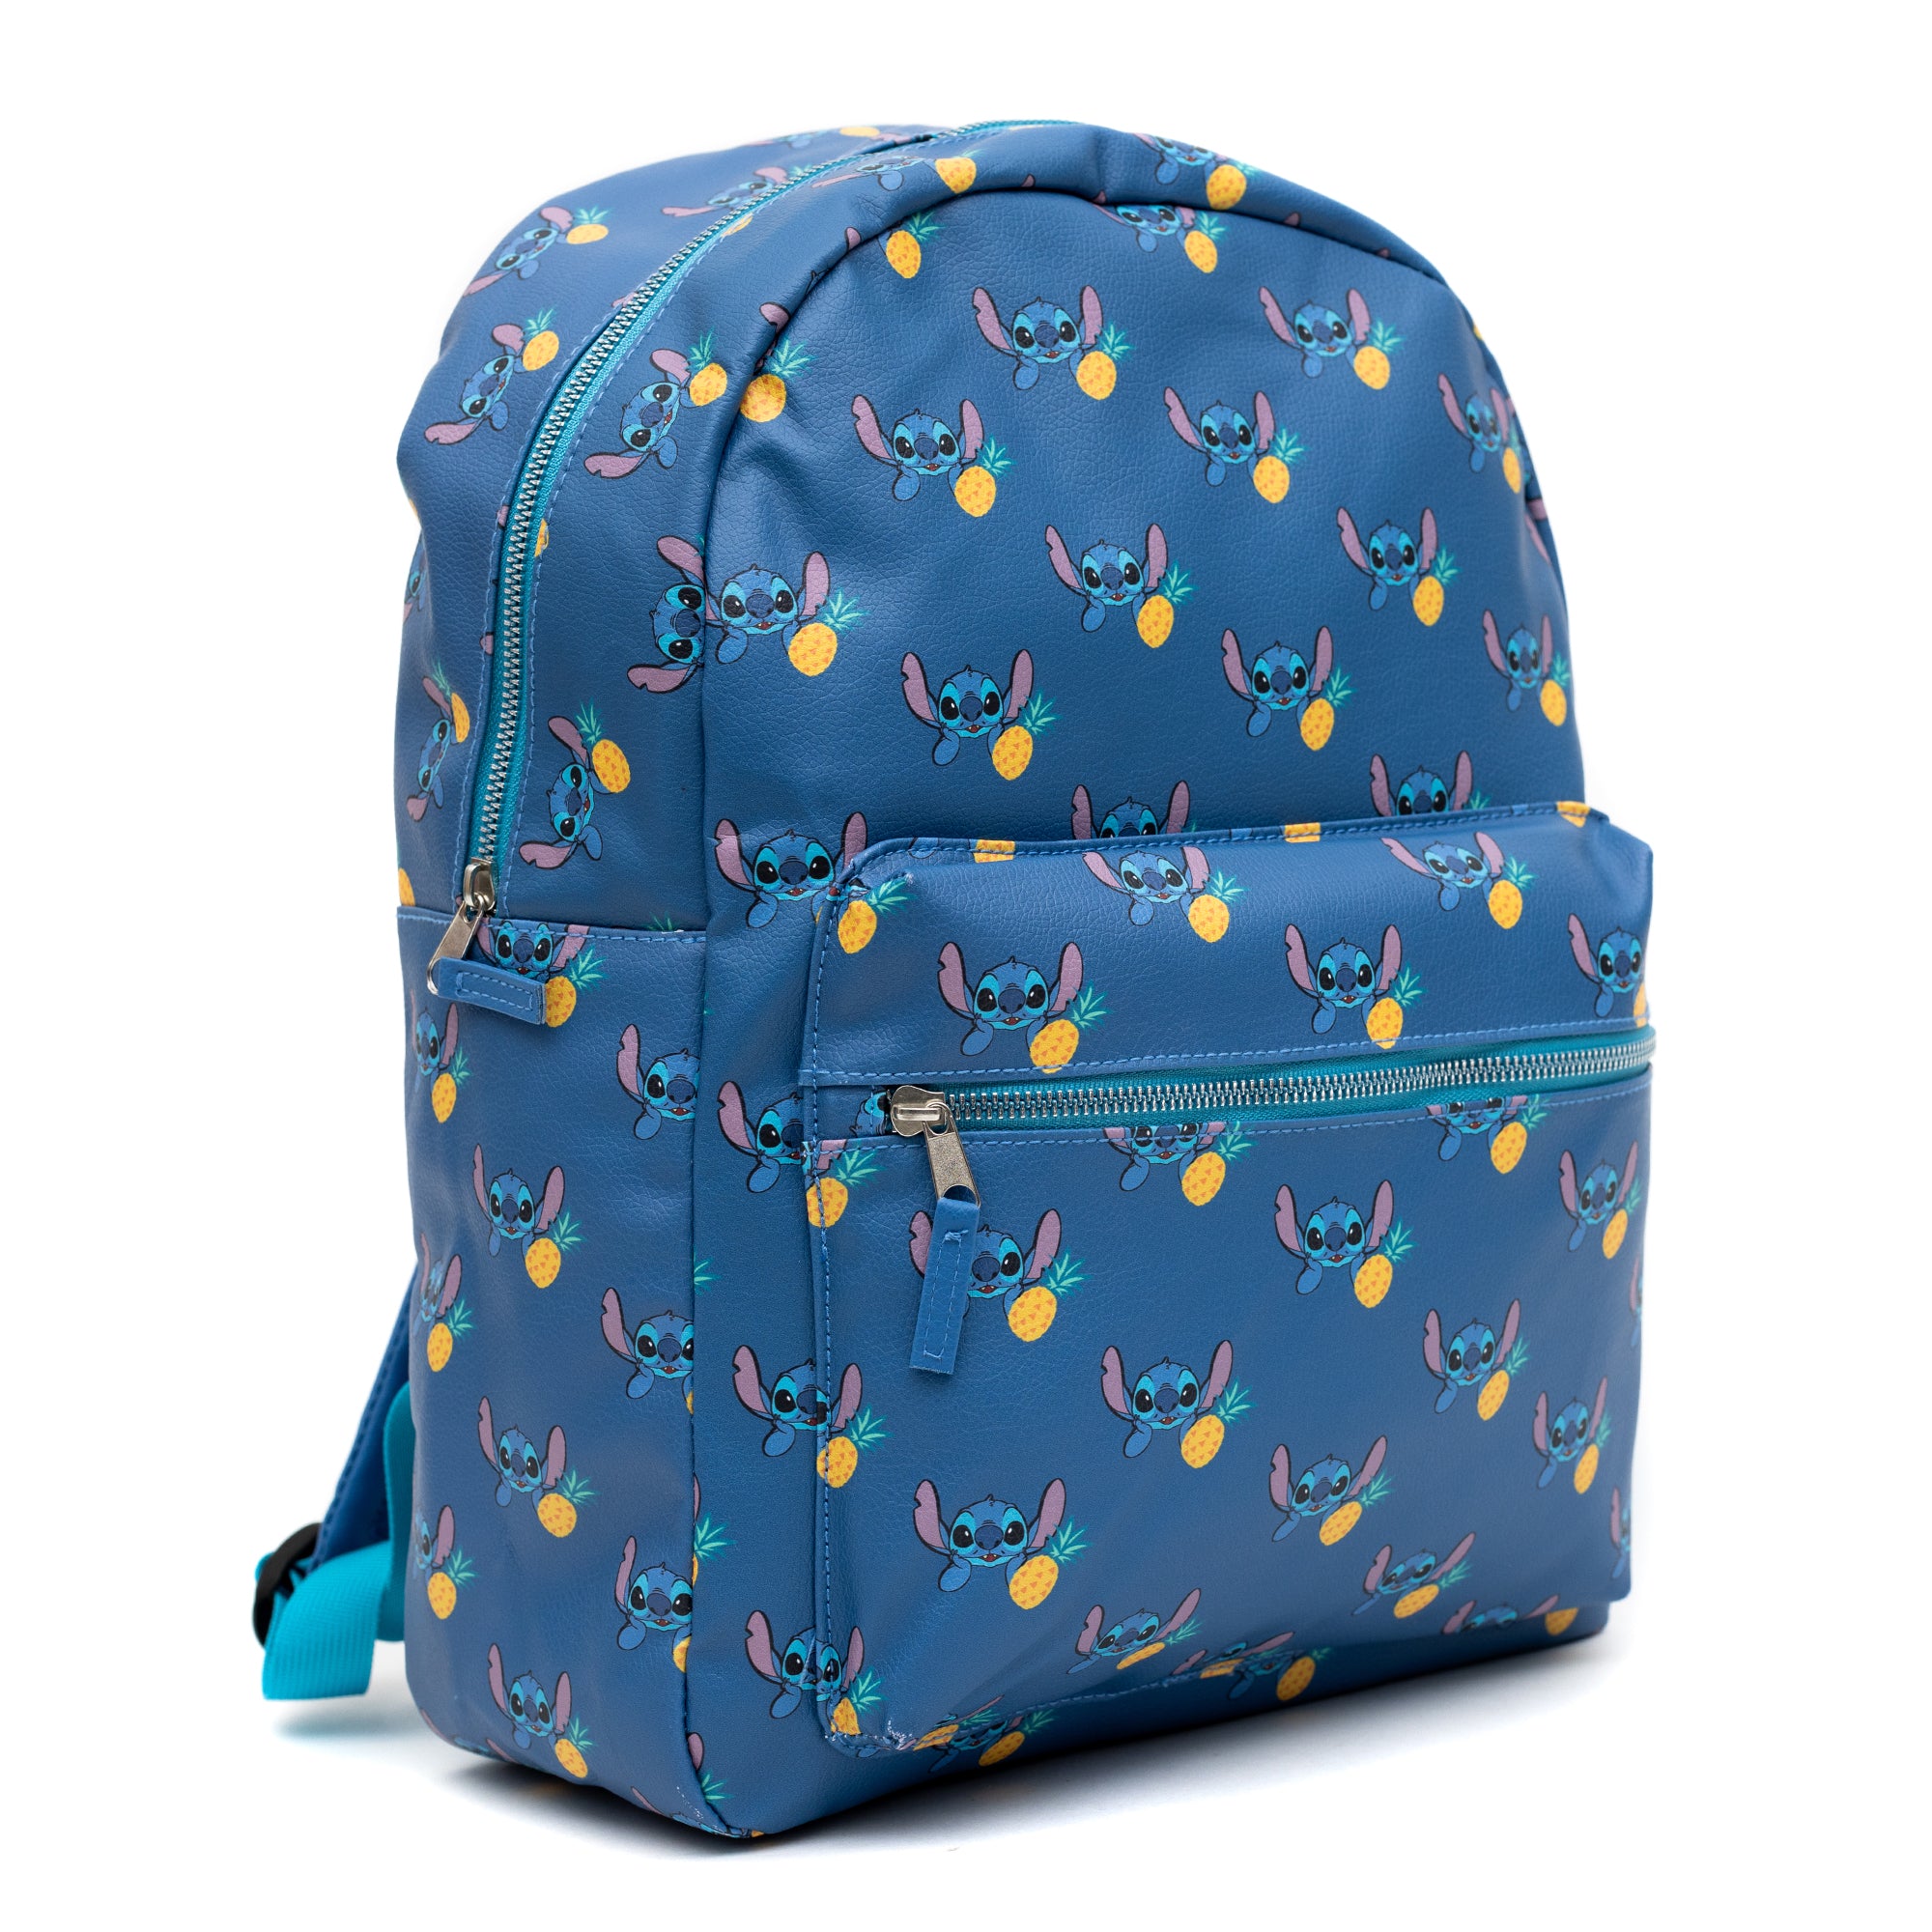 Disney Lilo and Stitch Pineapple Full Size Vegan Leather Backpack